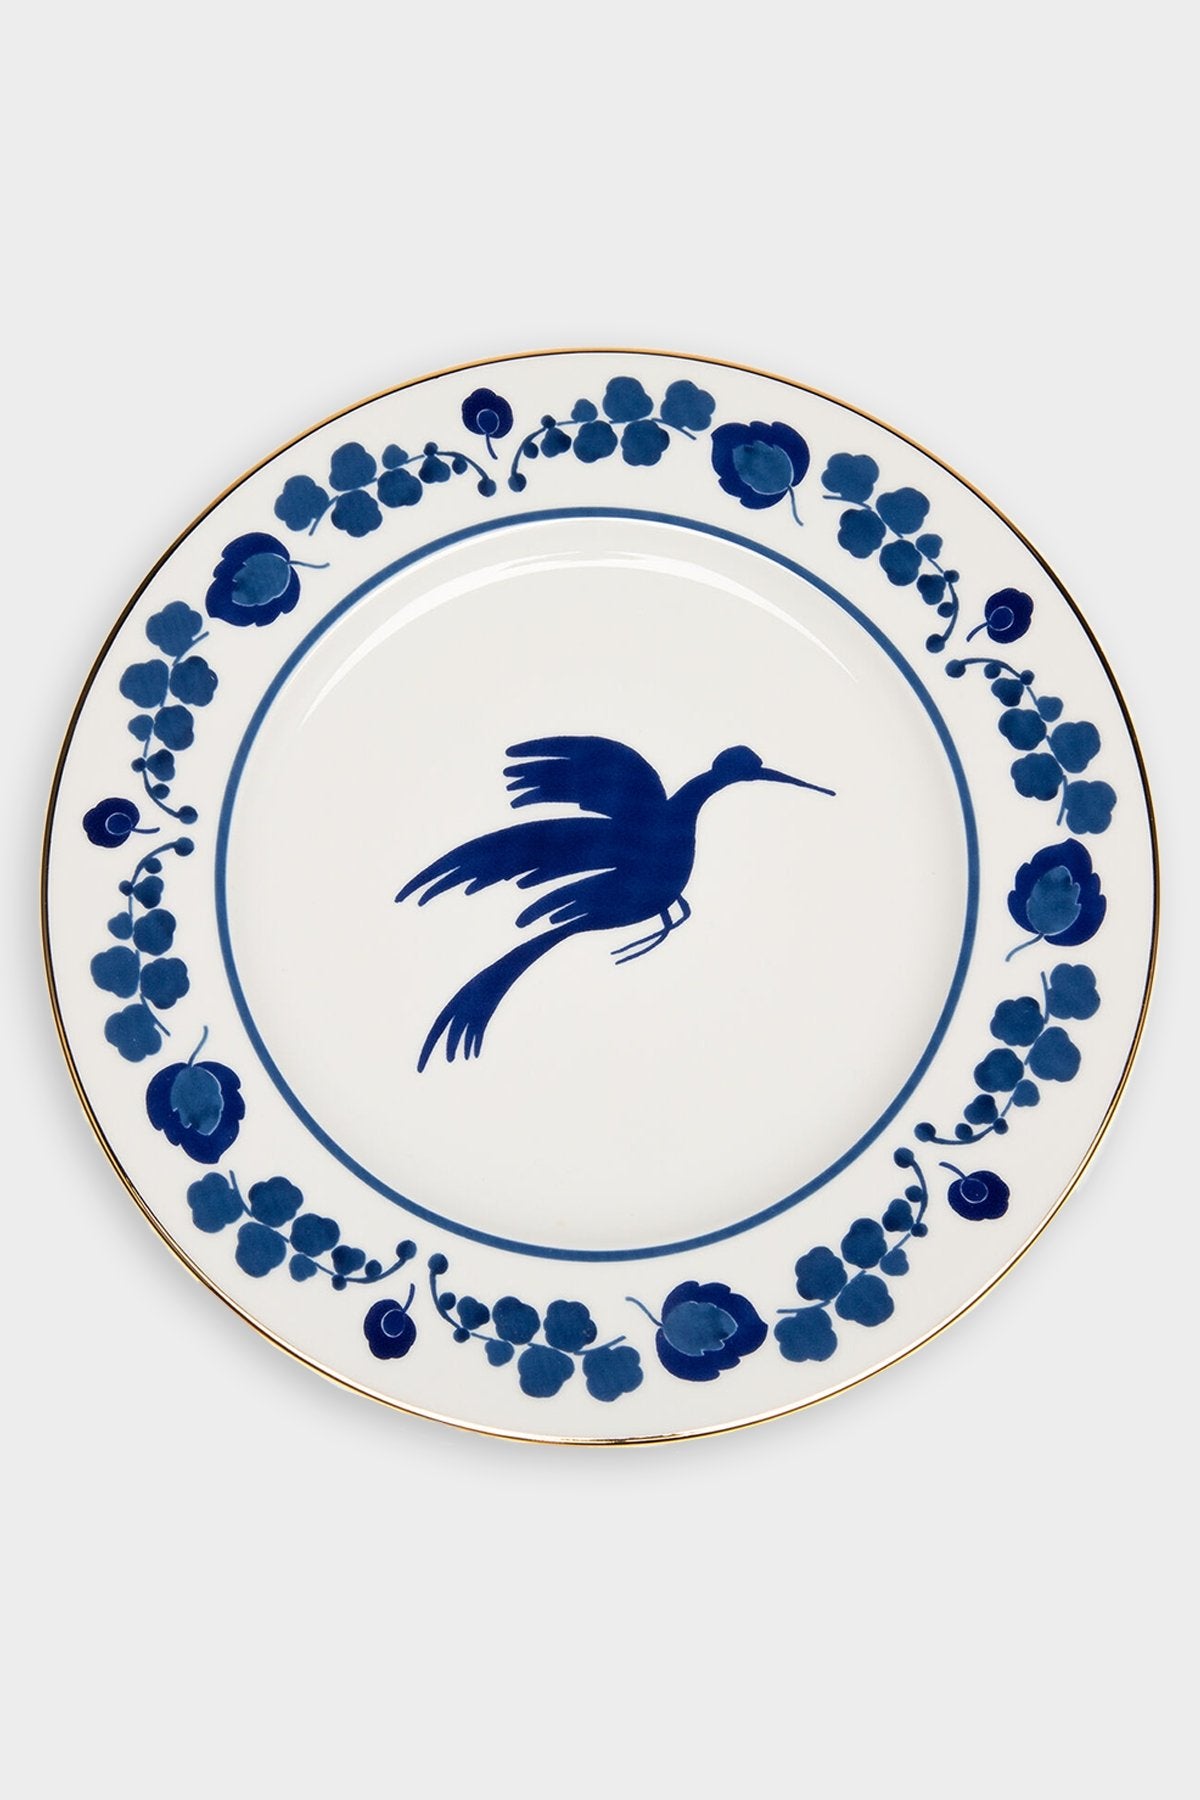 Charger Plate in Wildbird Blu - shop-olivia.com